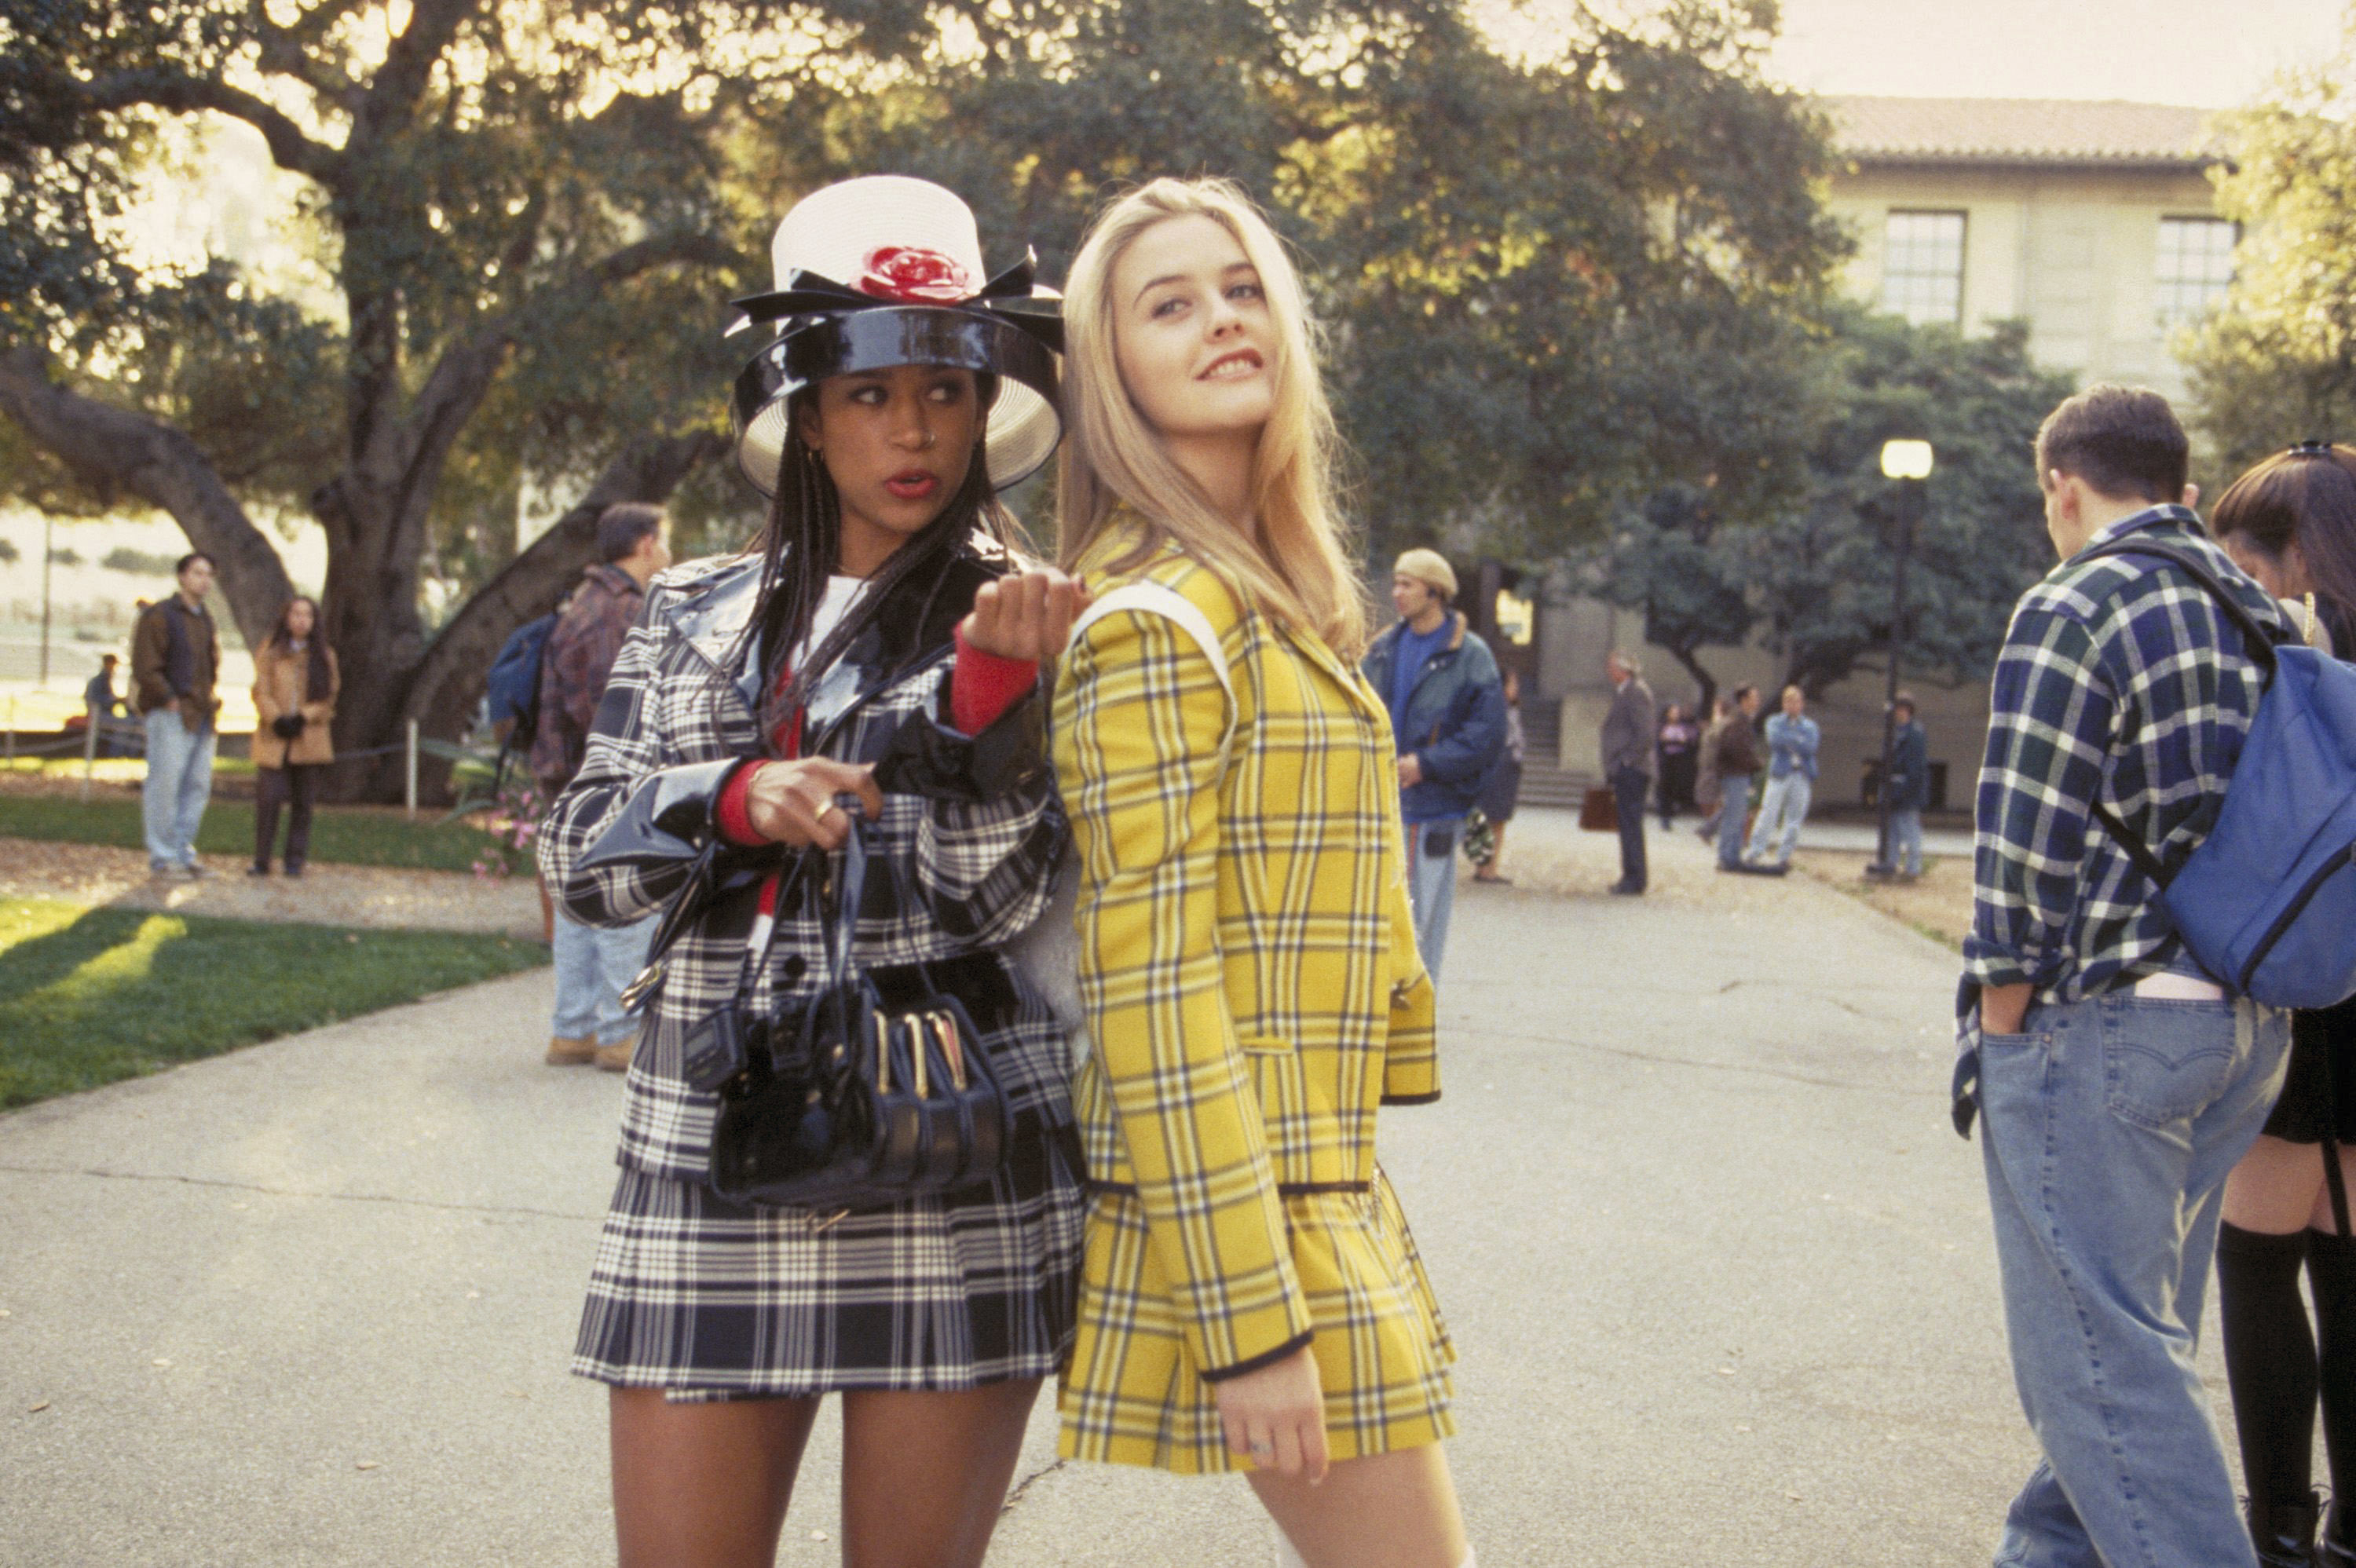 Two characters, Dionne and Cher, from the movie Clueless standing back-to-back, wearing trendy plaid outfits